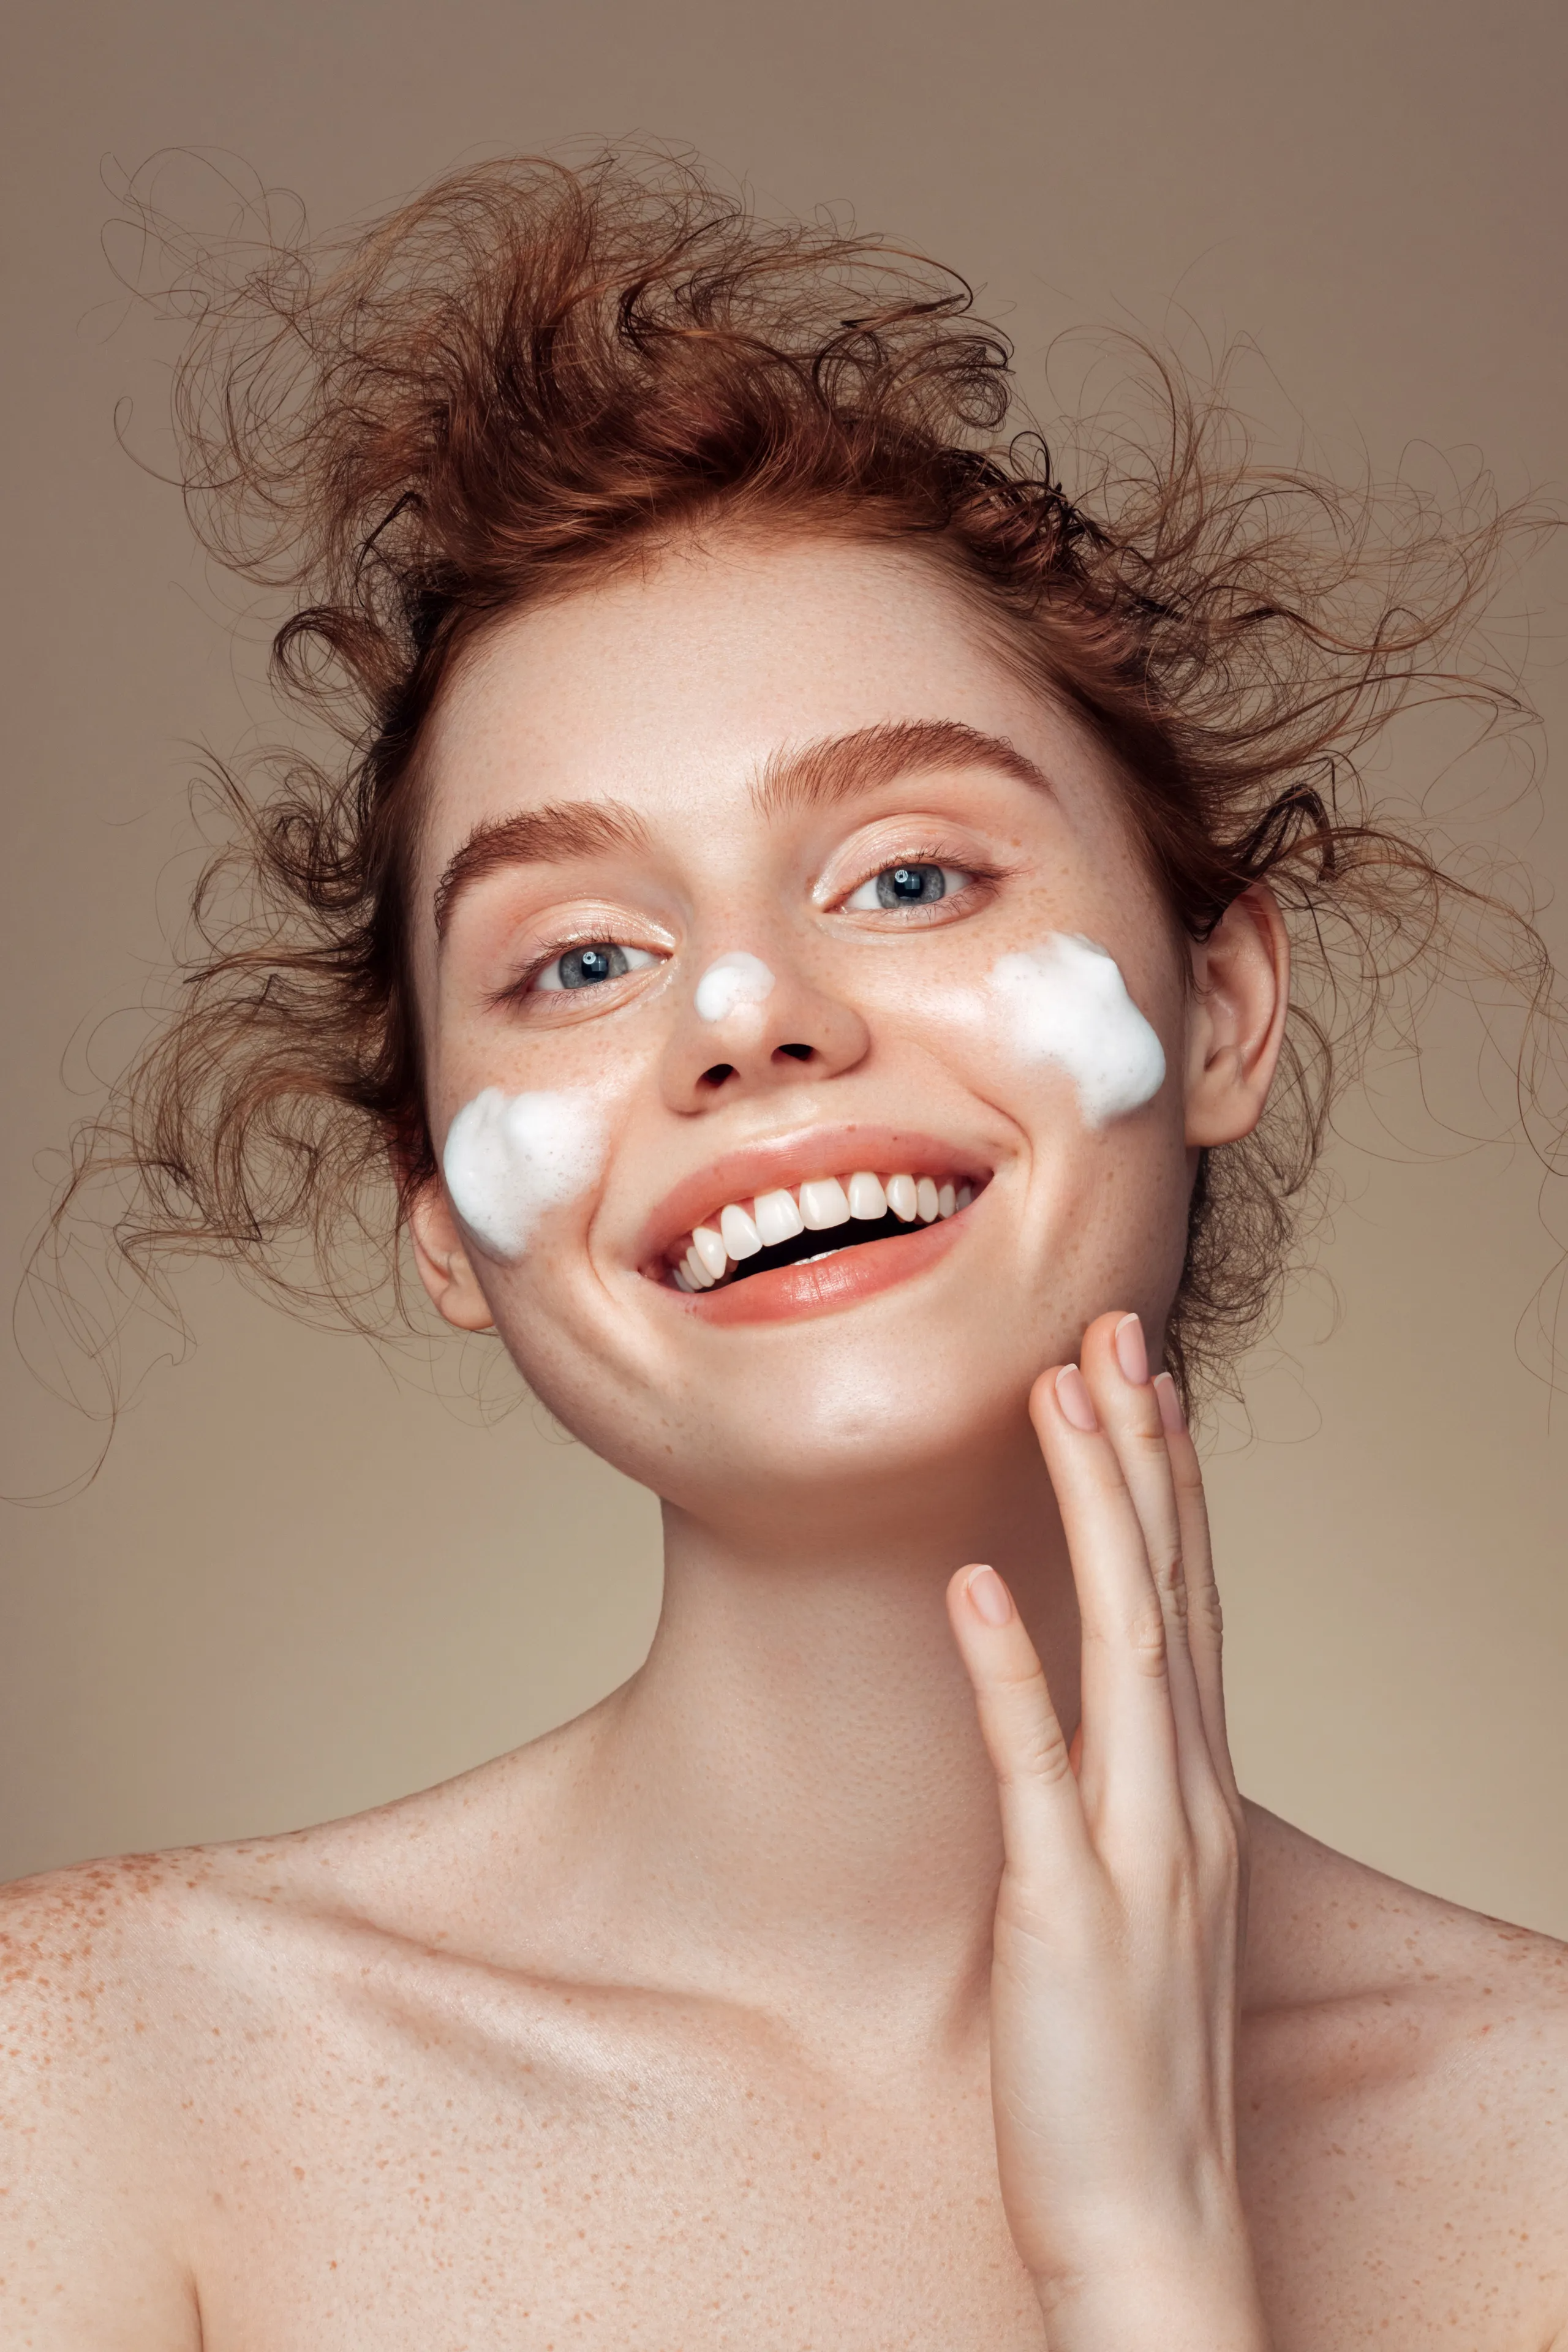 Your skin will be more perfect after facial mask